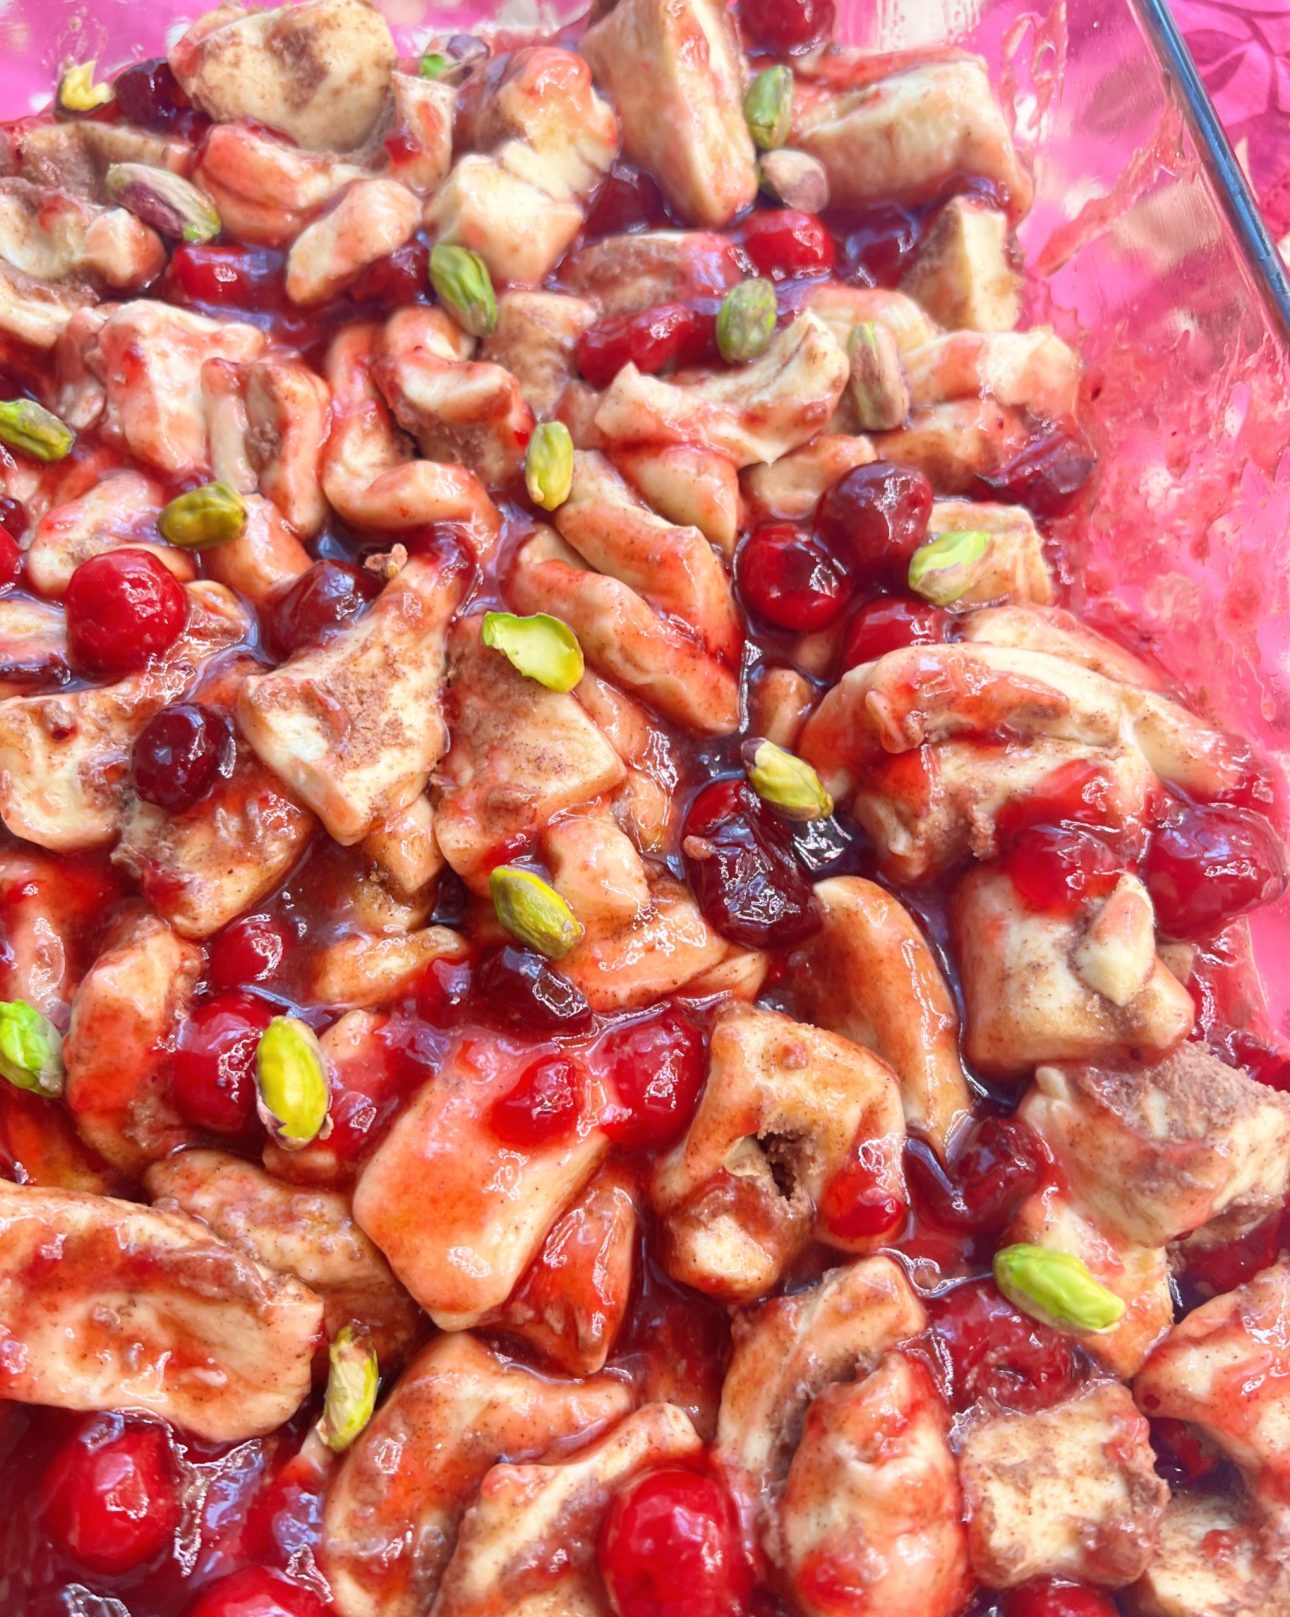 Cranberry Cherry Cinnamon Roll Casserole For A Crowd